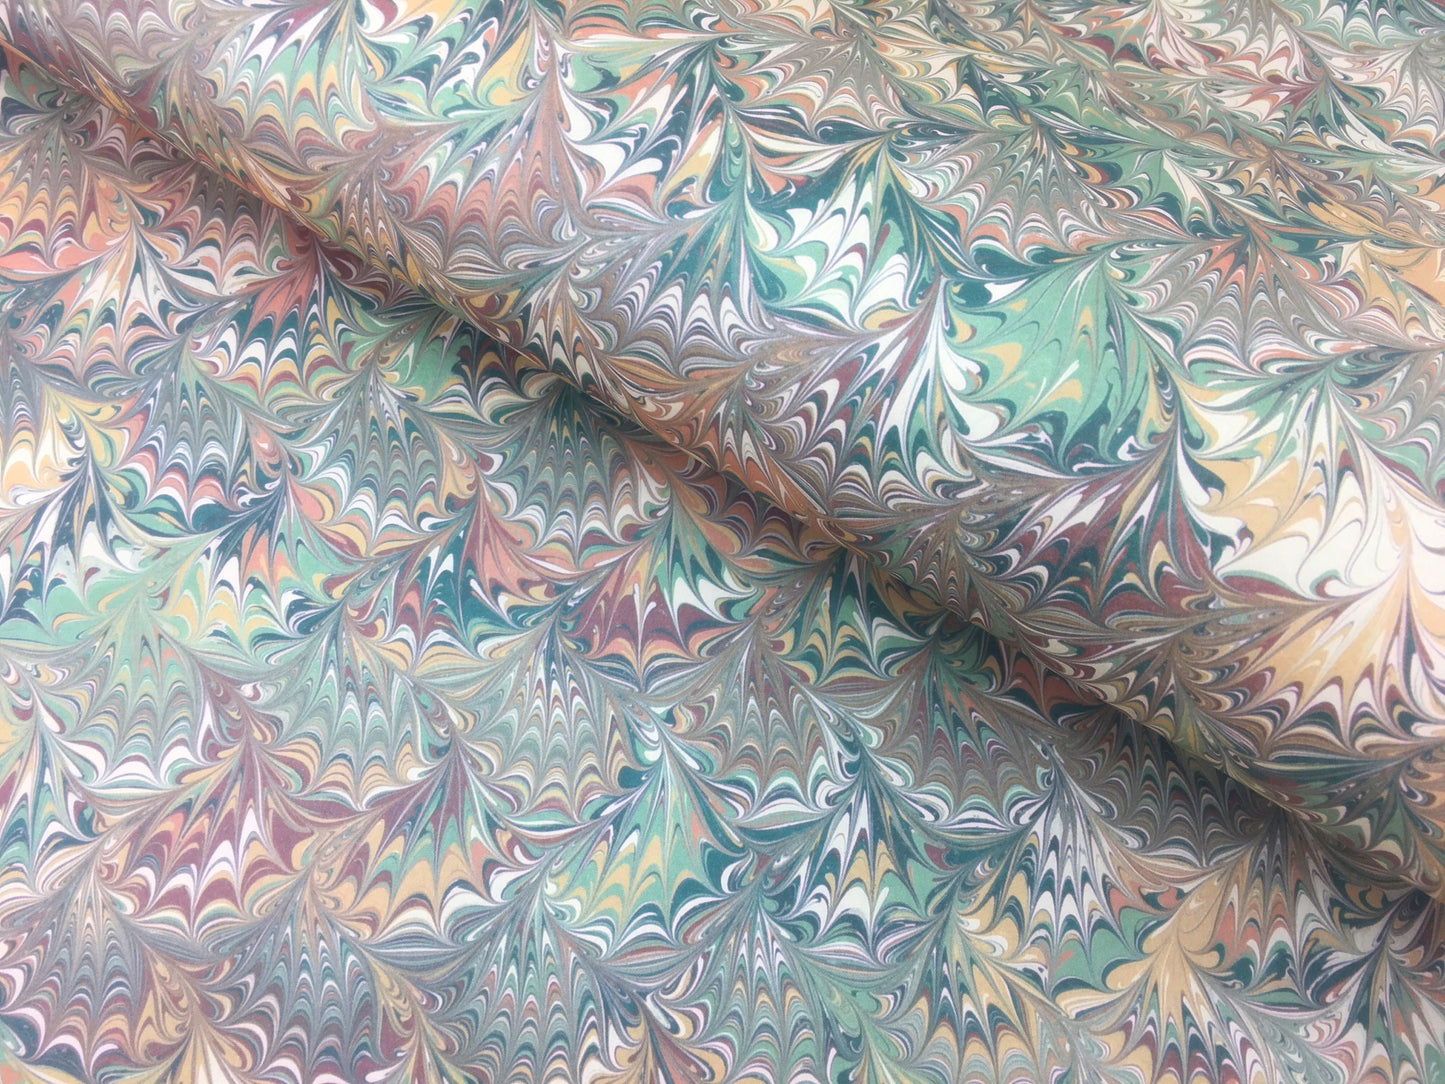 Printed marbled paper- HIGH DEFINITION-  THICK 100GSM ACID FREE PAPER- Suitable for book covers and end sheets- TBBPM18